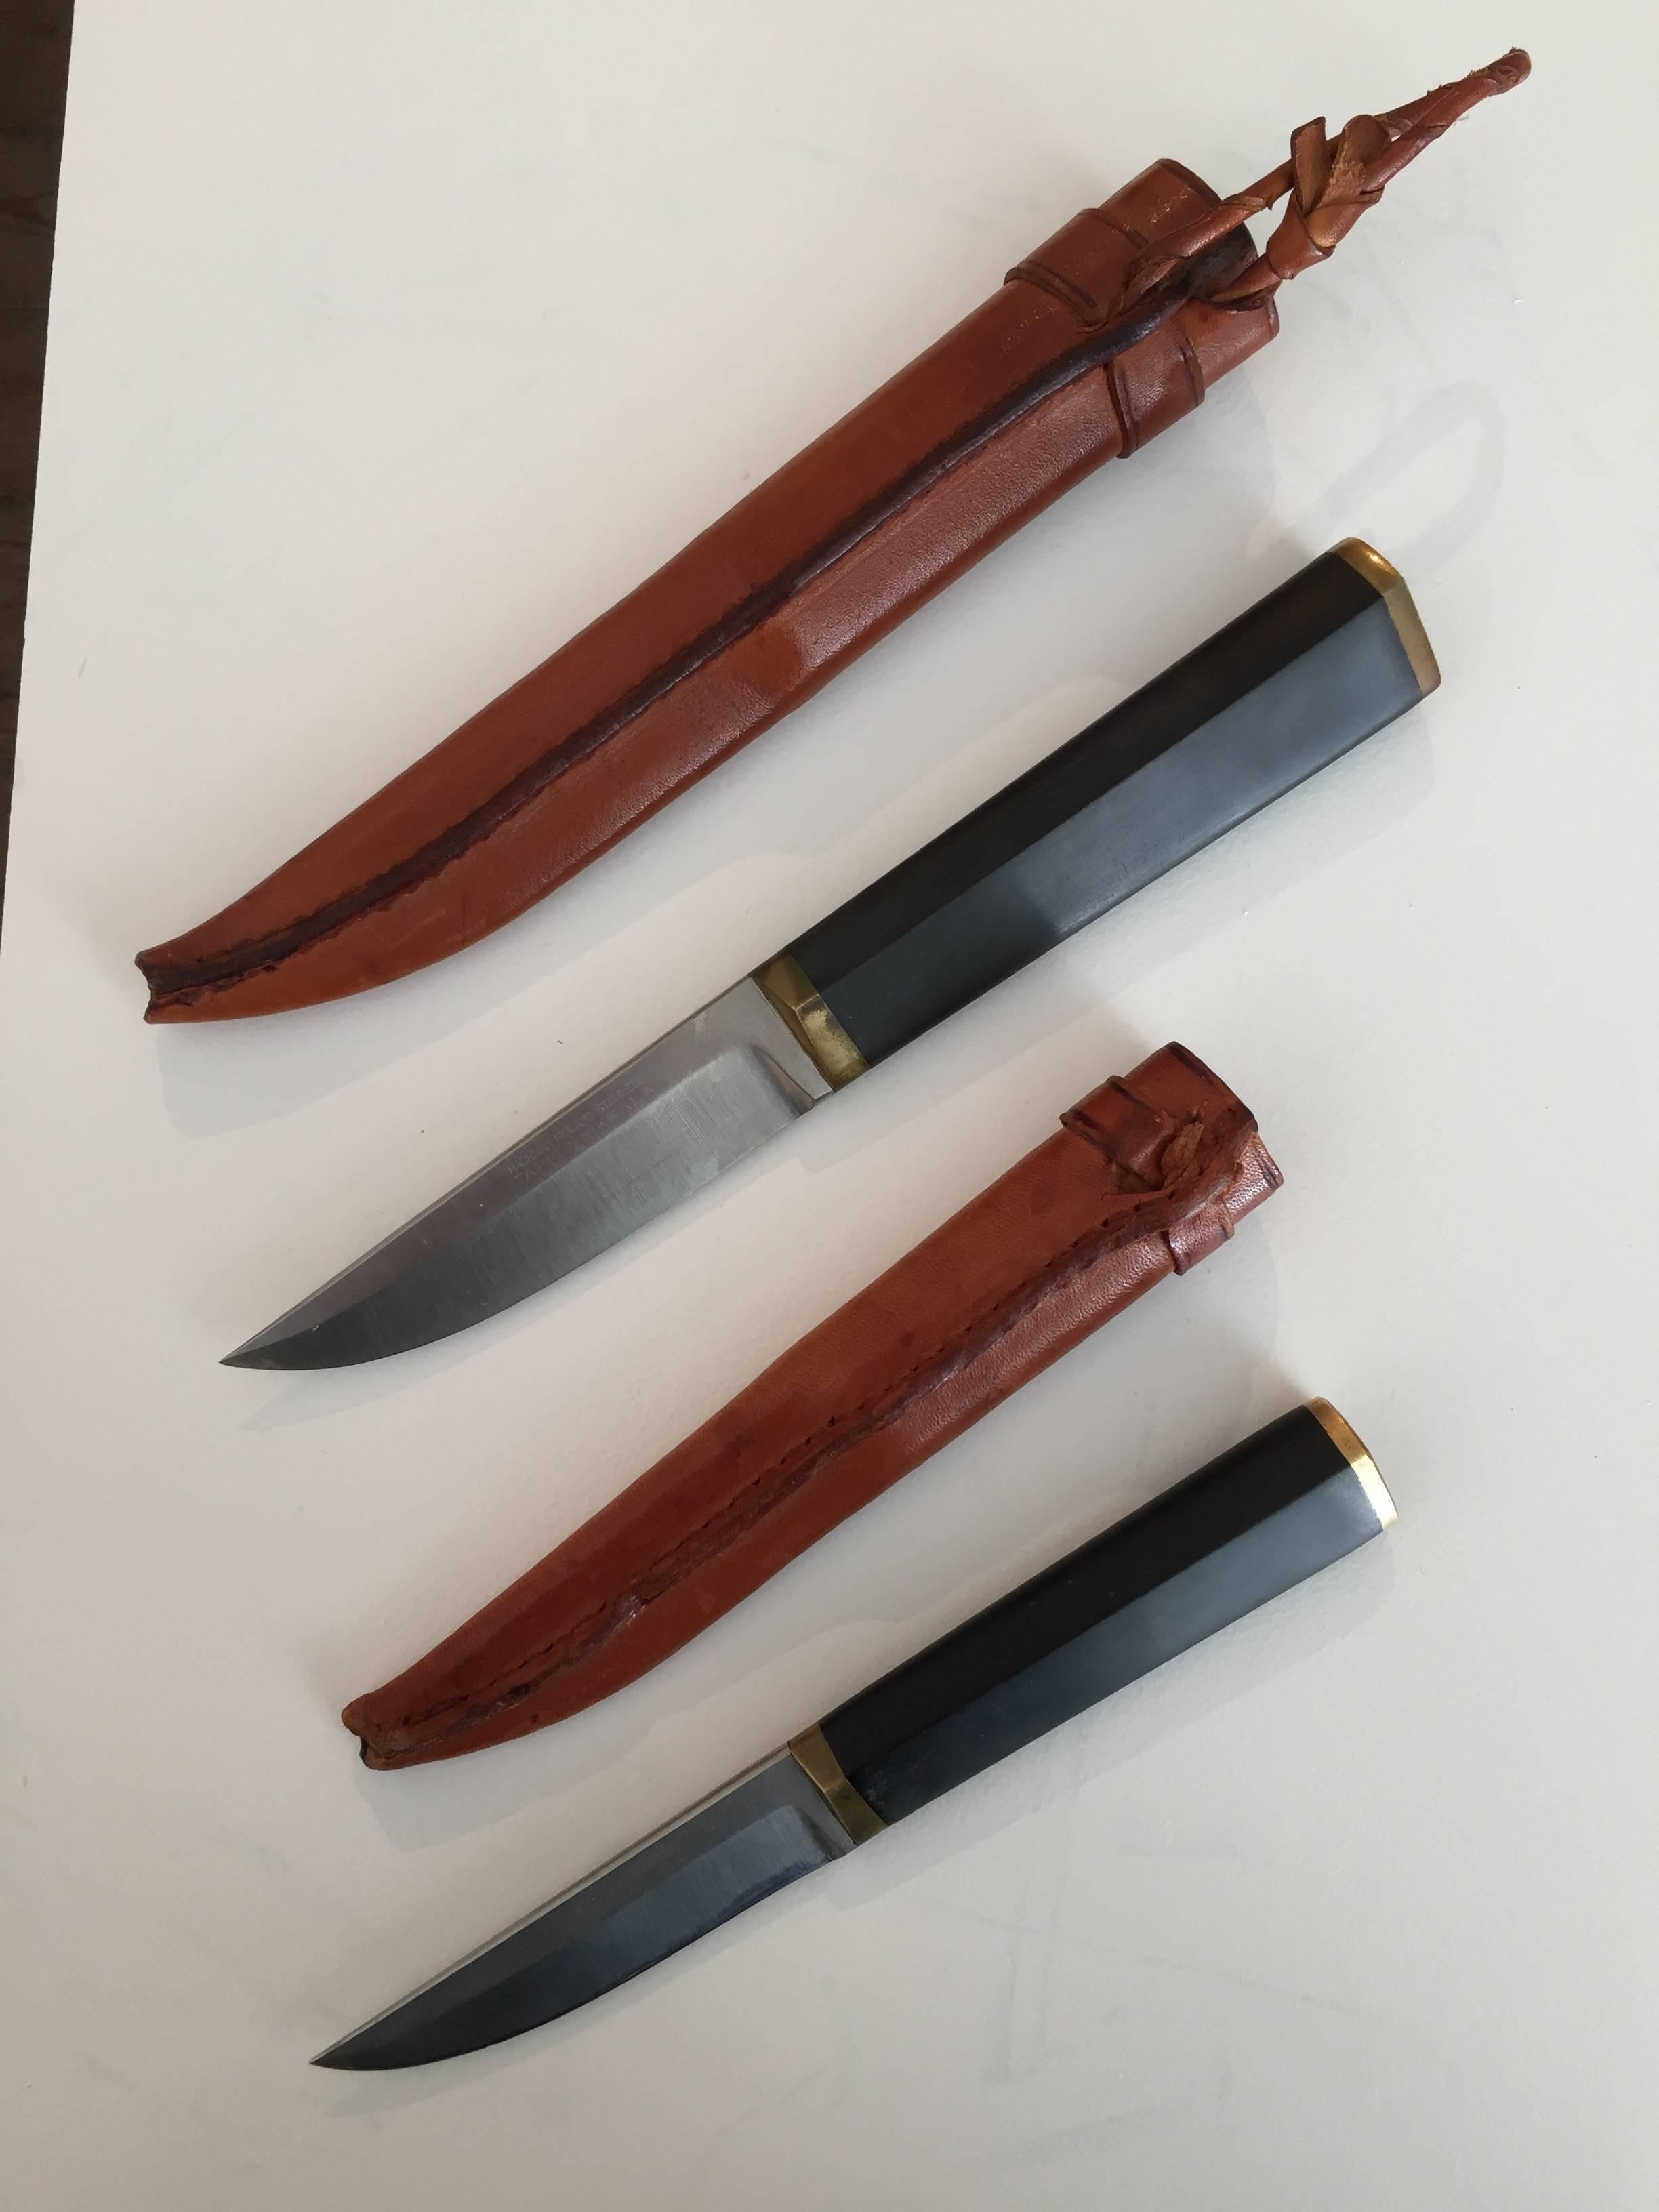 Set consisting of a large and smaller knife designed by Tapio Wirkkala.
Rare to find a set of the two sizes. Overall a hard to find Wirkkala piece.
Both knives in good very sharp condition with no damage to the cutting sides.
Comes with original